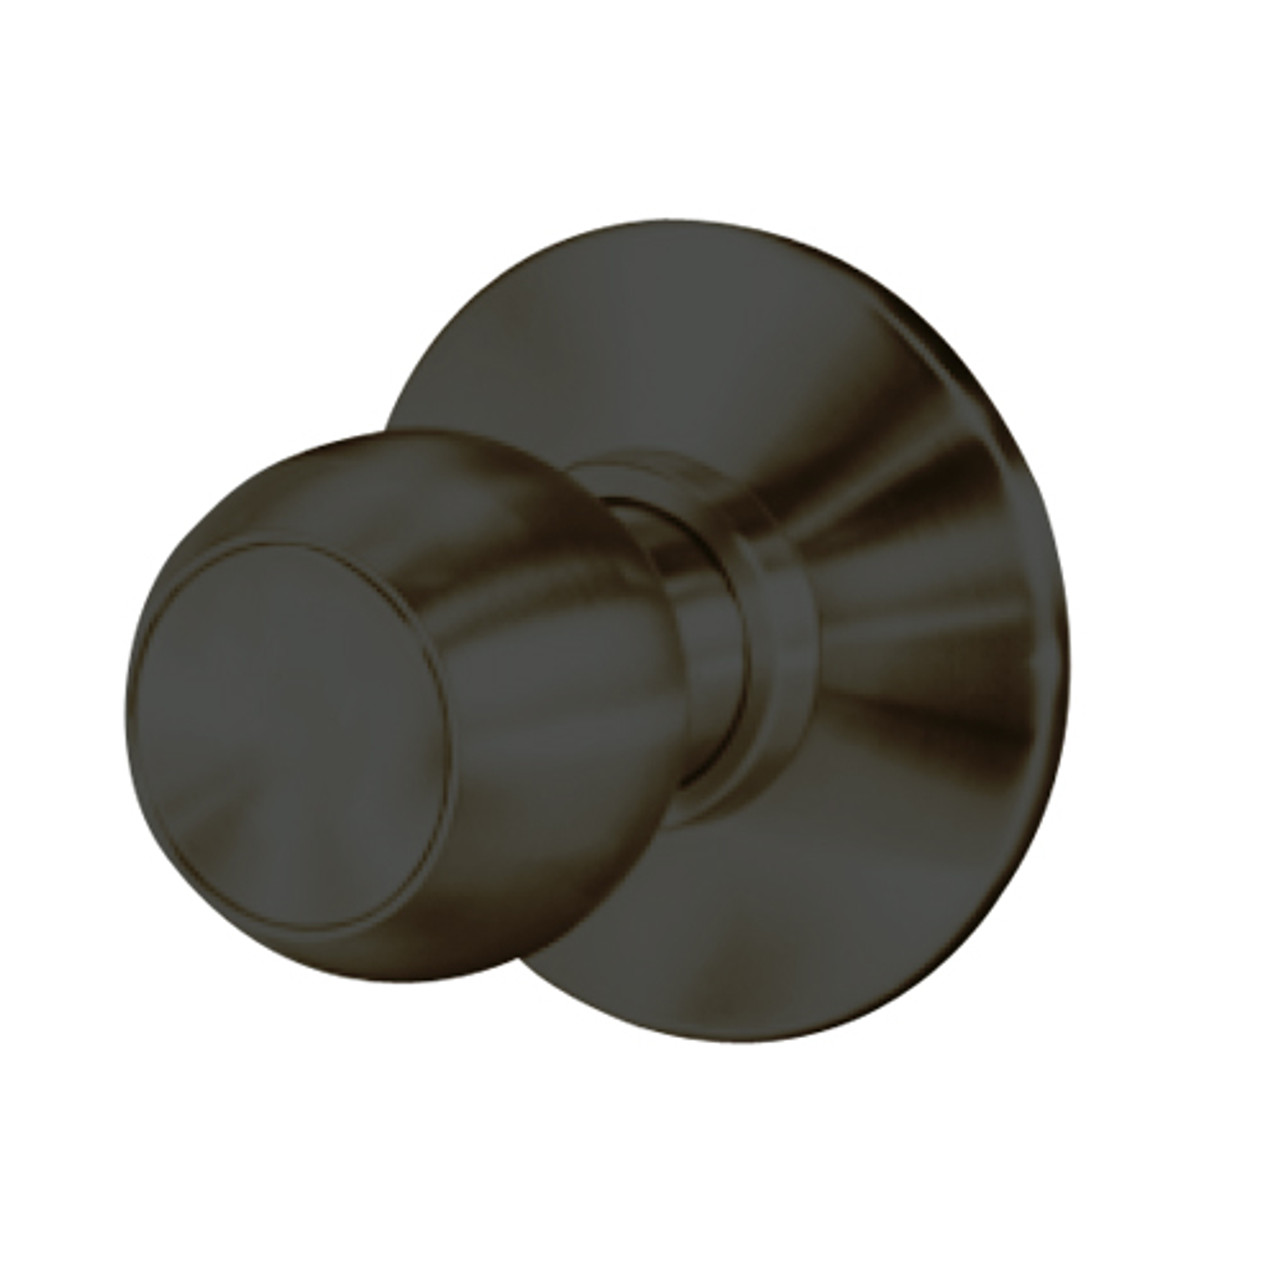 8K30NX4DS3613 Best 8K Series Exit Heavy Duty Cylindrical Knob Locks with Round Style in Oil Rubbed Bronze